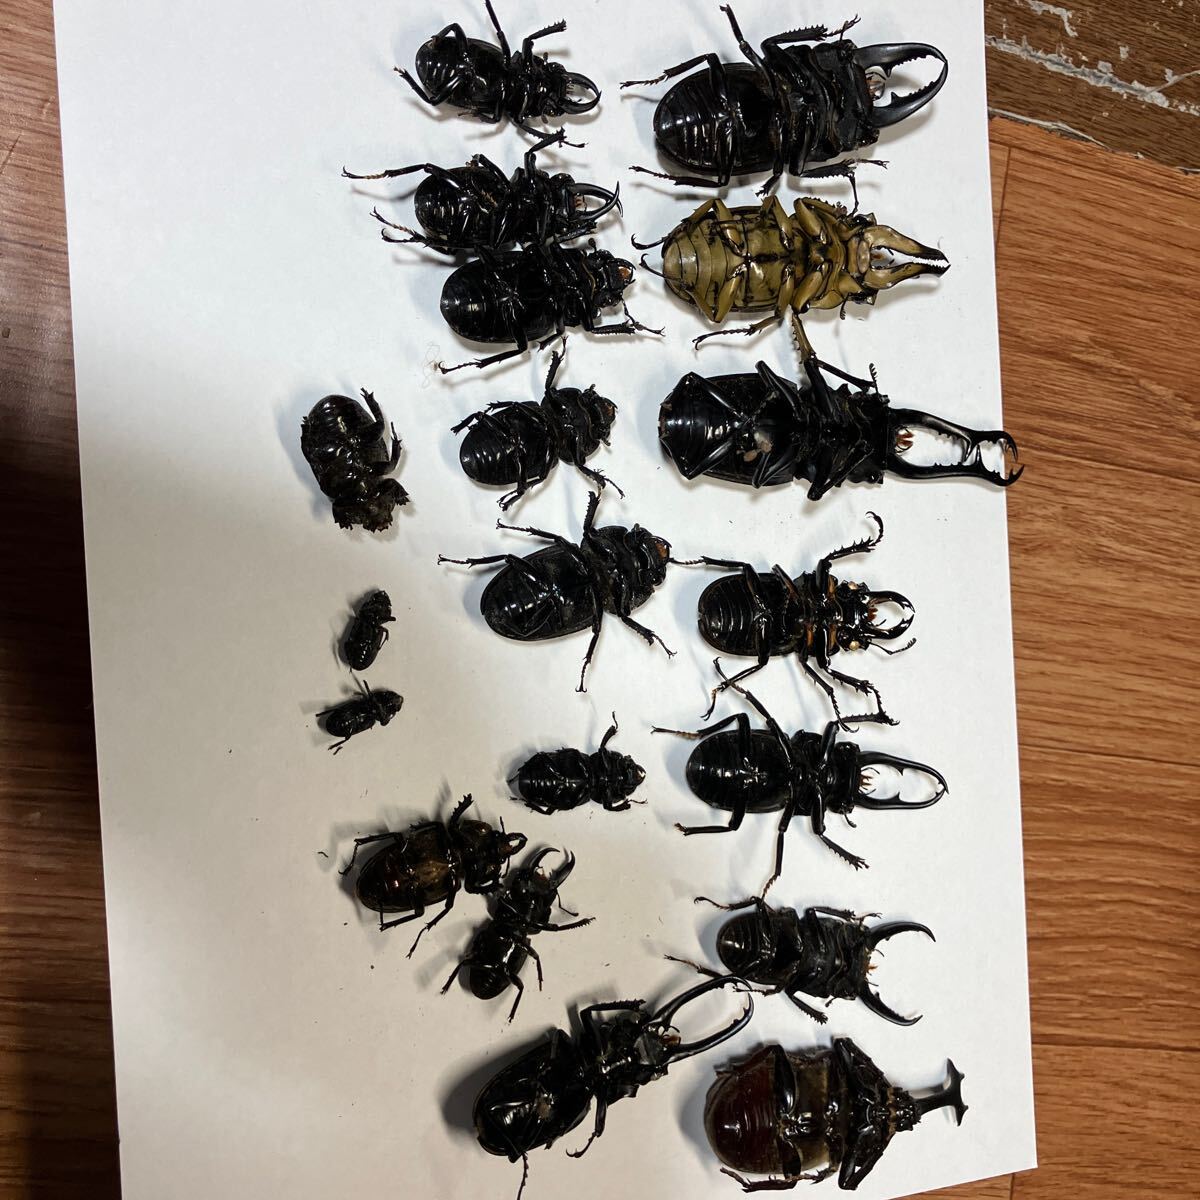  stag beetle rhinoceros beetle . insect [B goods fsetsu etc. exist thing ] certainly understanding received person. please tender.!! dry is 3 months above we do.